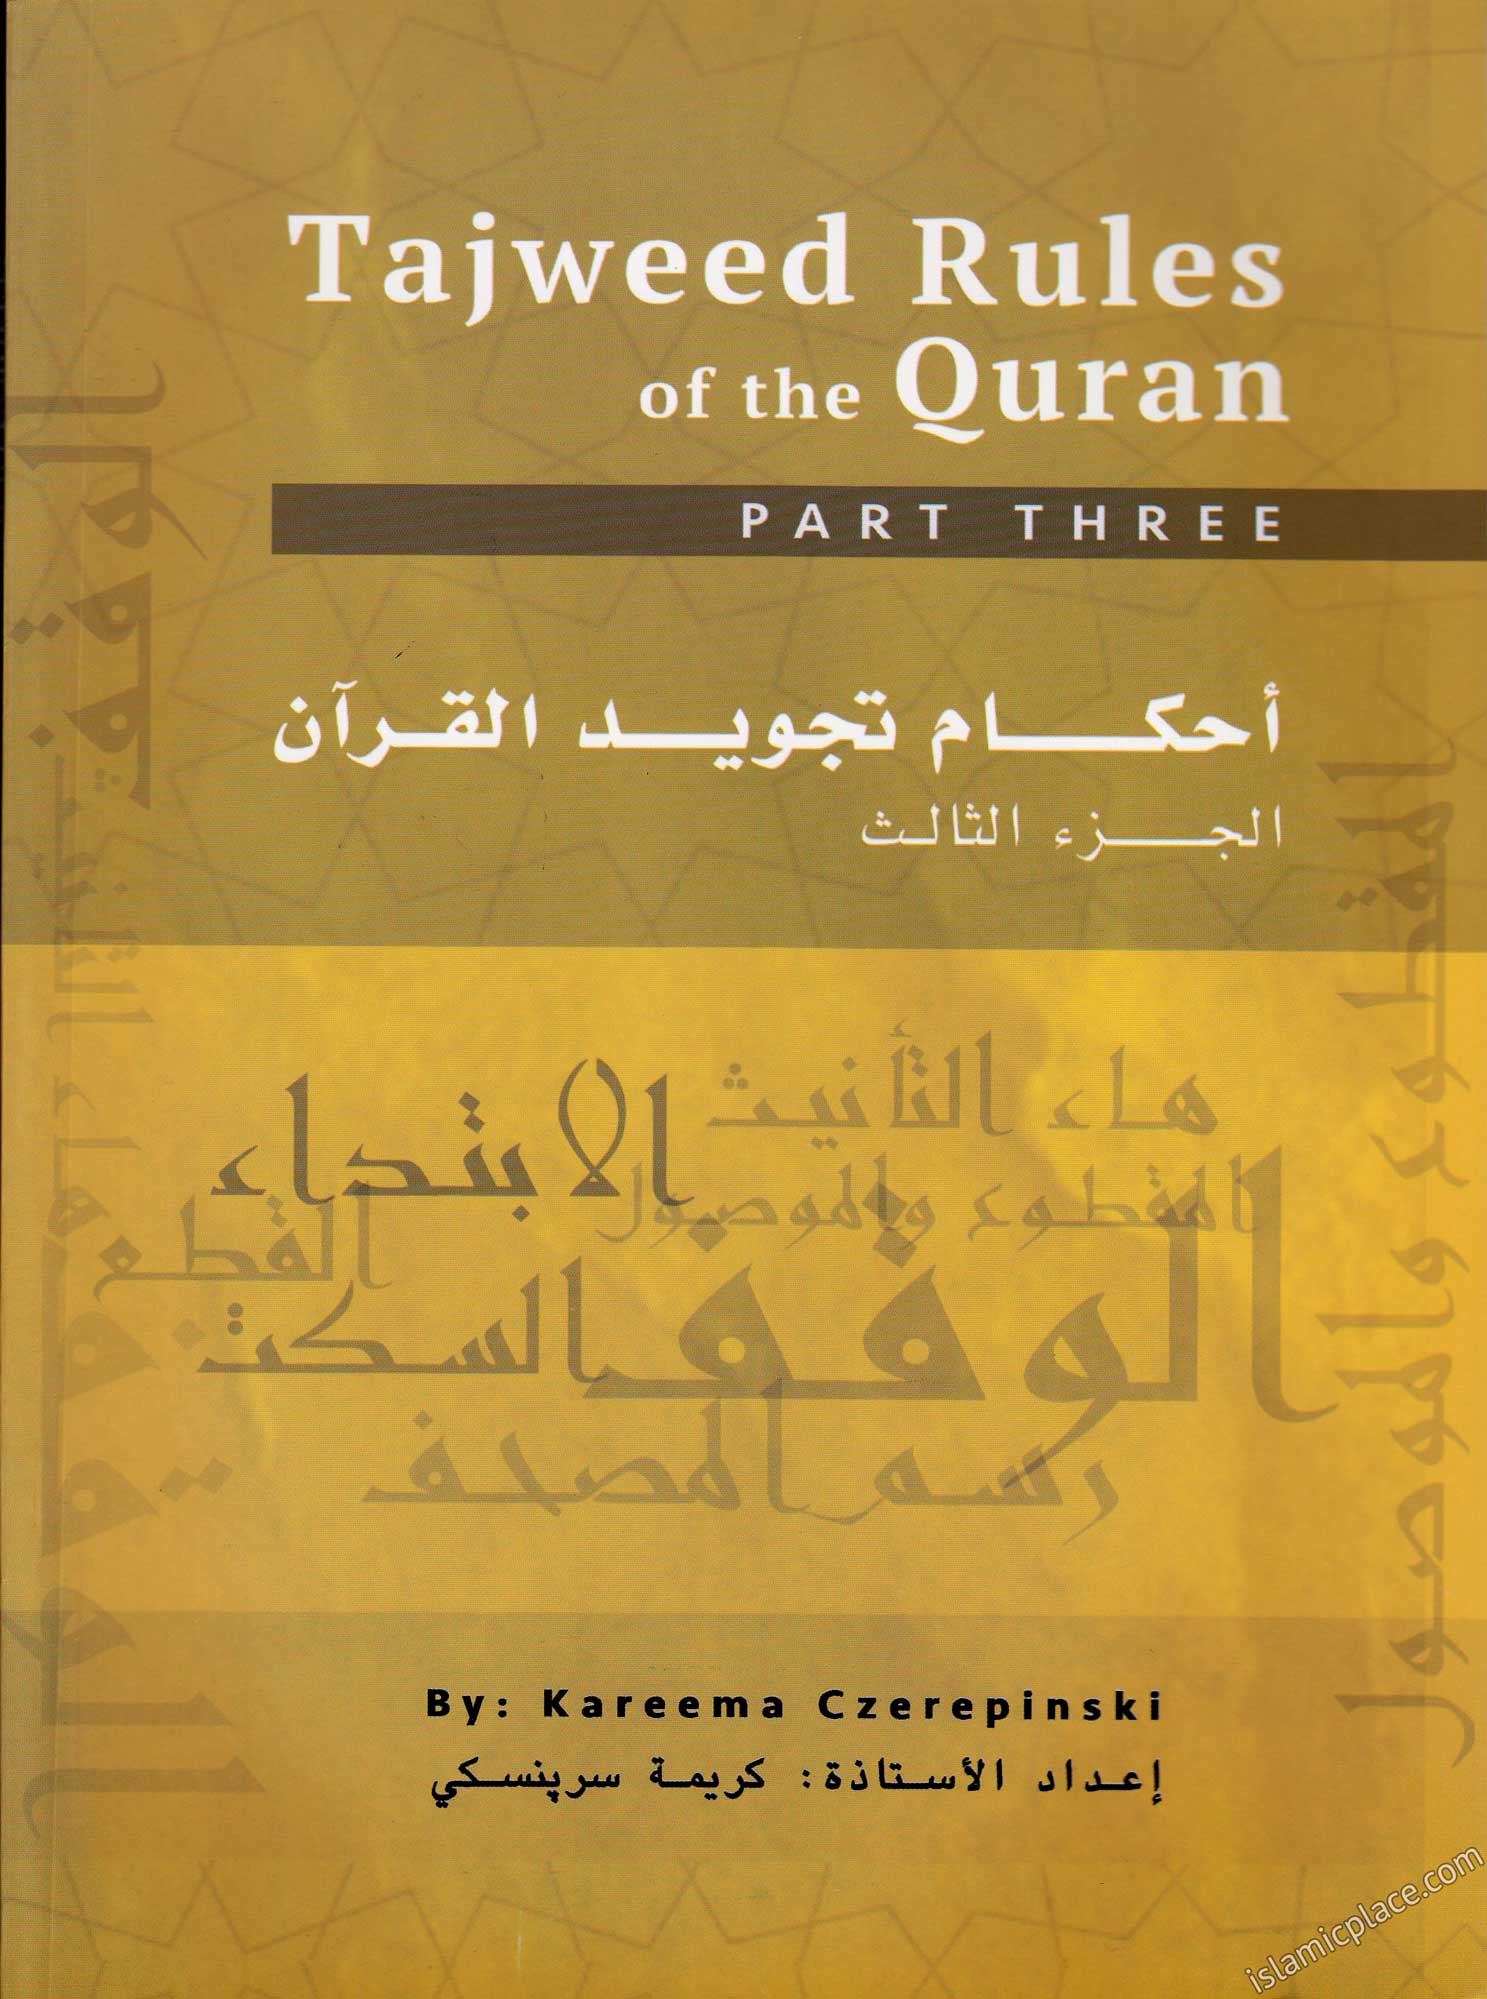 Tajweed Rules of the Qur'an - Part 3